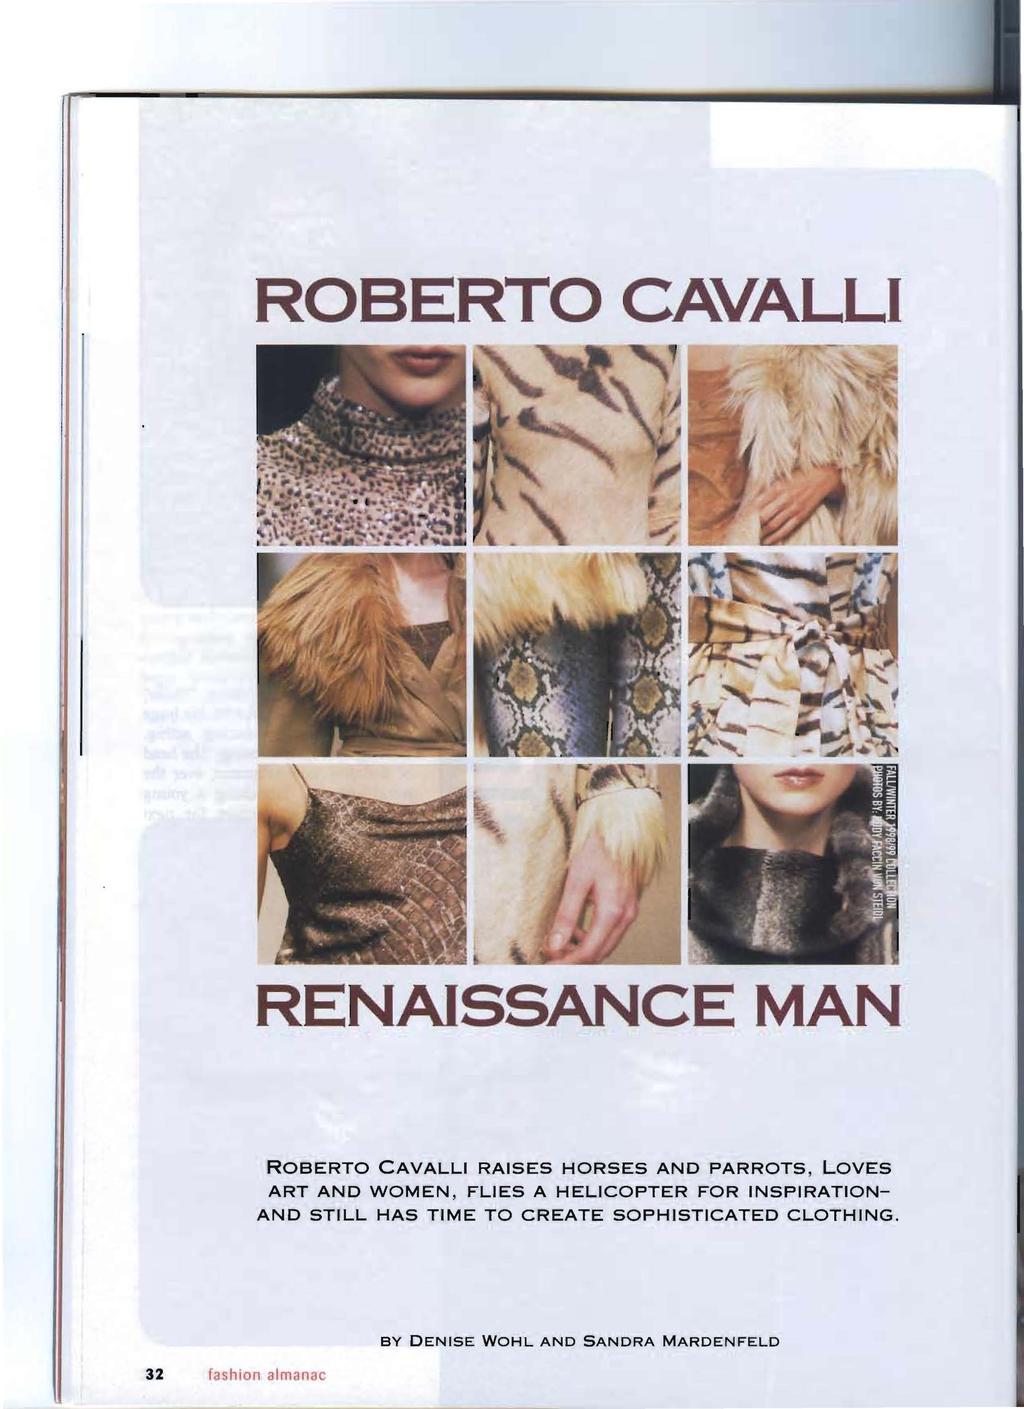 ROBERTO CAVALLI RENAISSANCE MA ROBERTO CAVALLI RAISES HORSES AND PARROTS, LOVES ART AND WOMEN, FLIES A HELICOPTER FOR